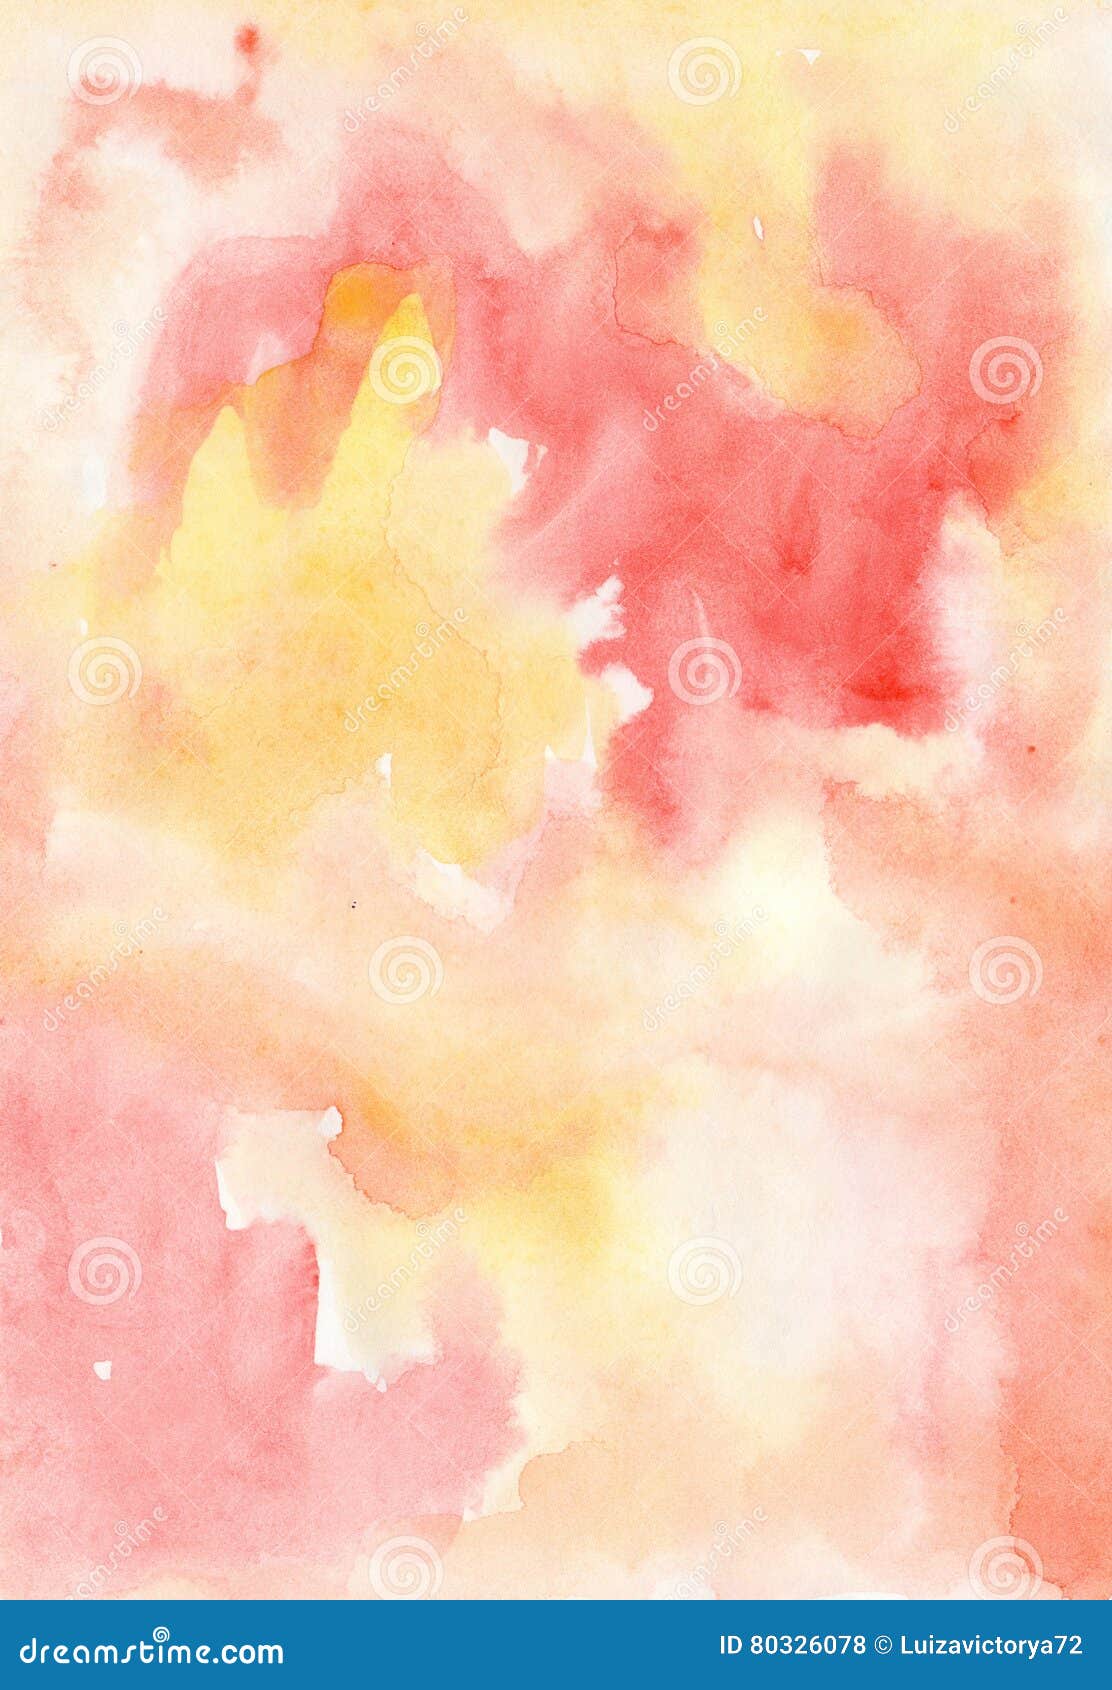 Watercolour Abstract Wash Painting Background for Design Stock Illustration  - Illustration of design, acrylic: 80326078